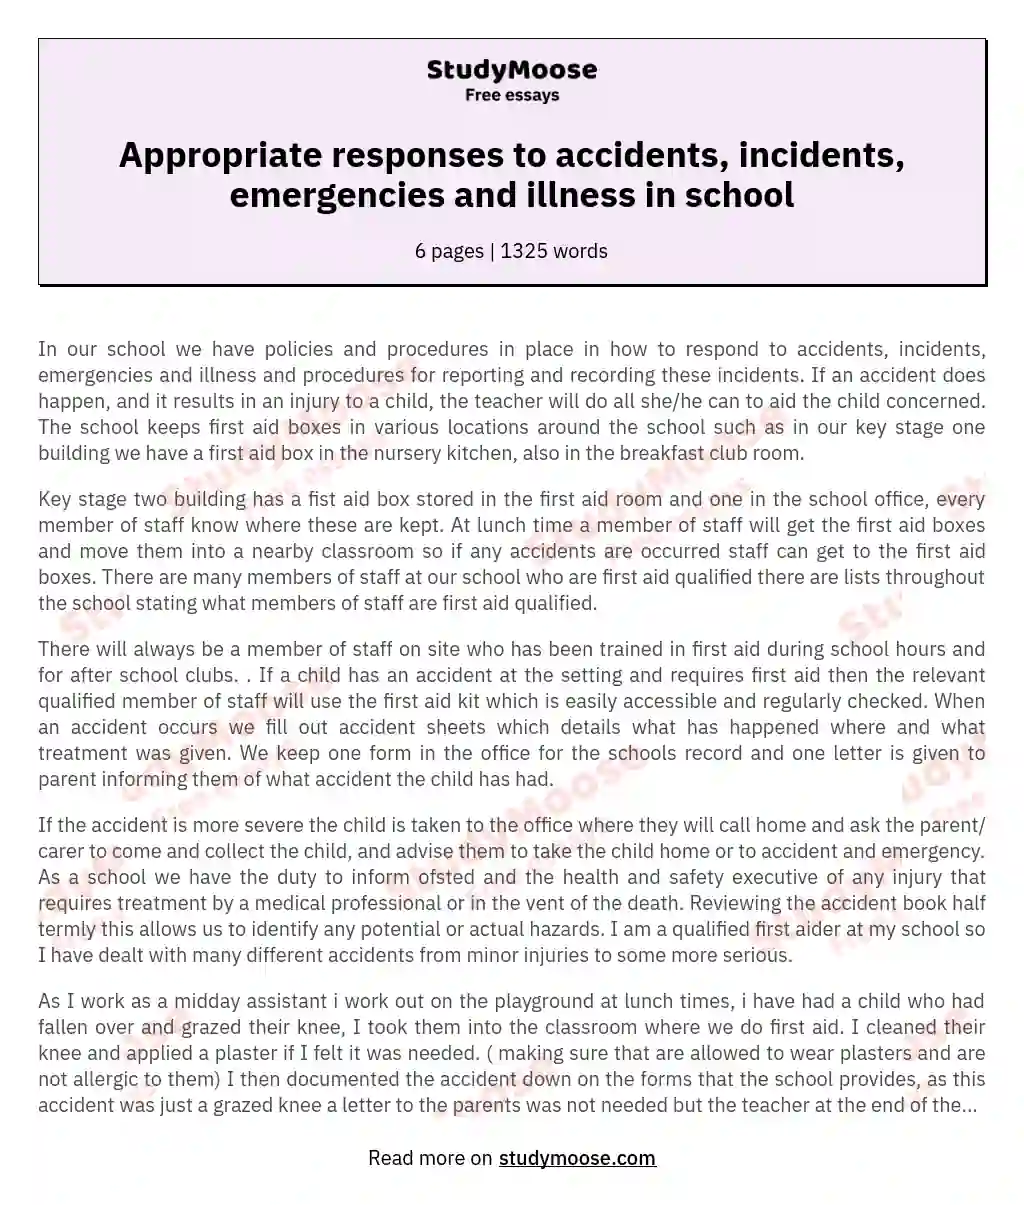 Appropriate responses to accidents, incidents, emergencies and illness in school